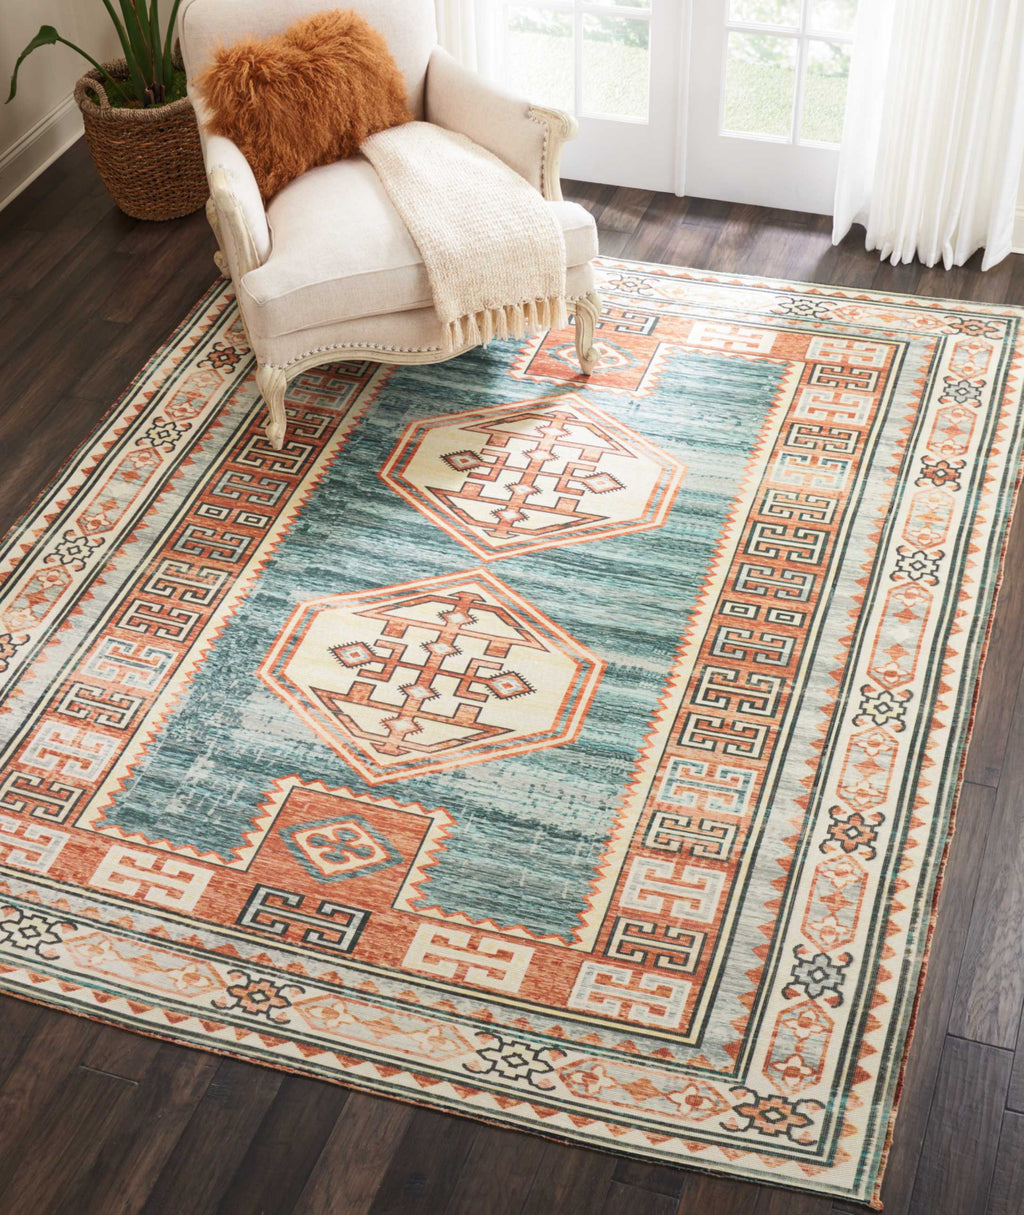 Nourison Madera MAD04 Teal Green Area Rug Room Image Feature